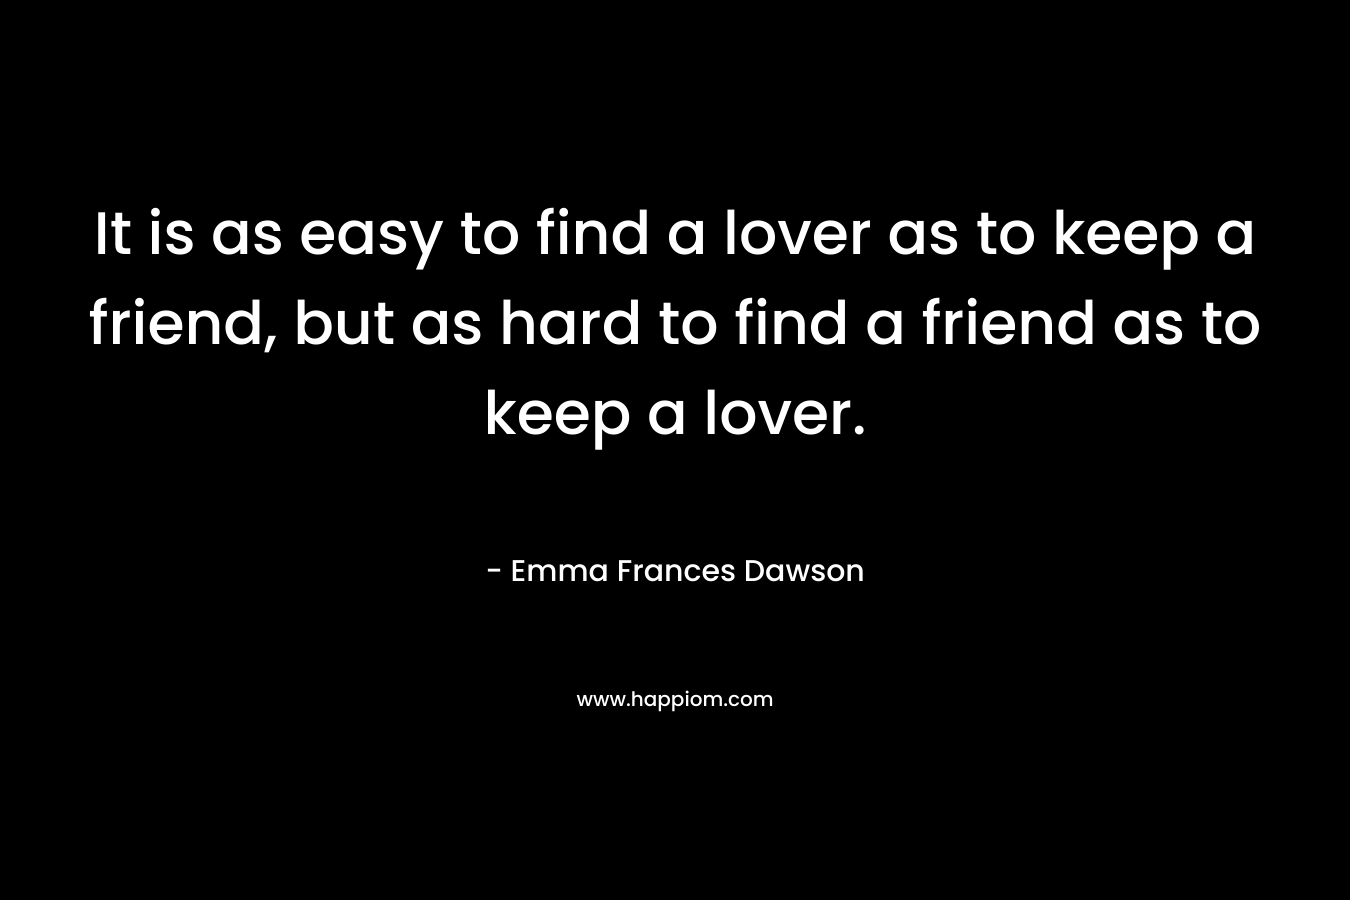 It is as easy to find a lover as to keep a friend, but as hard to find a friend as to keep a lover.